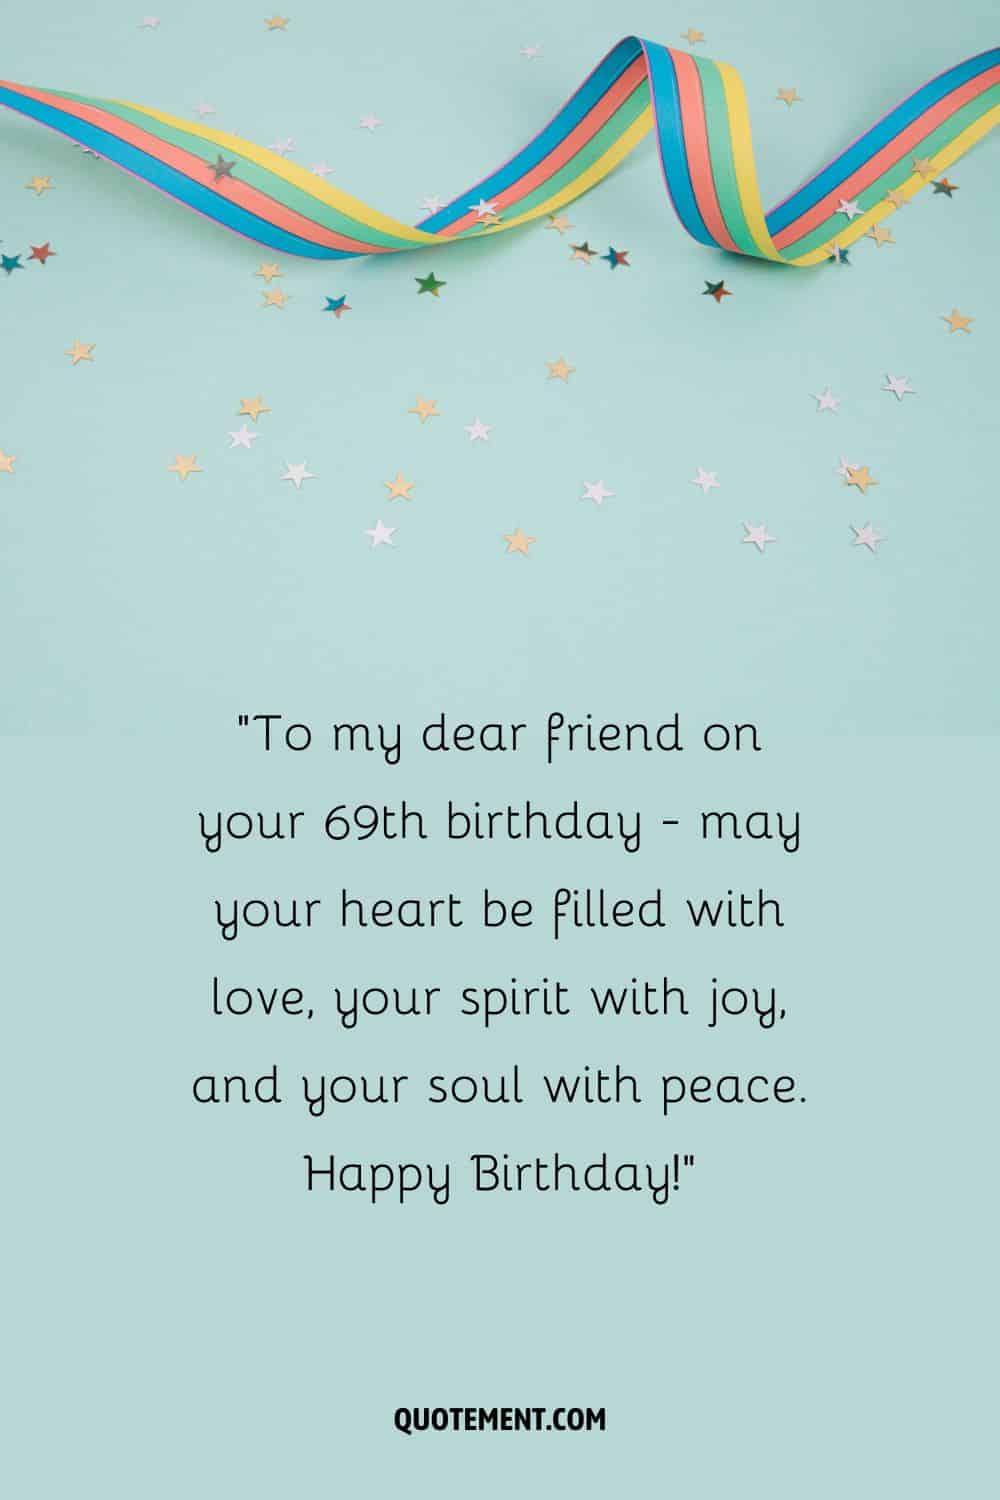 To my dear friend on your 69th birthday - may your heart be filled with love, your spirit with joy, and your soul with peace. Happy Birthday!